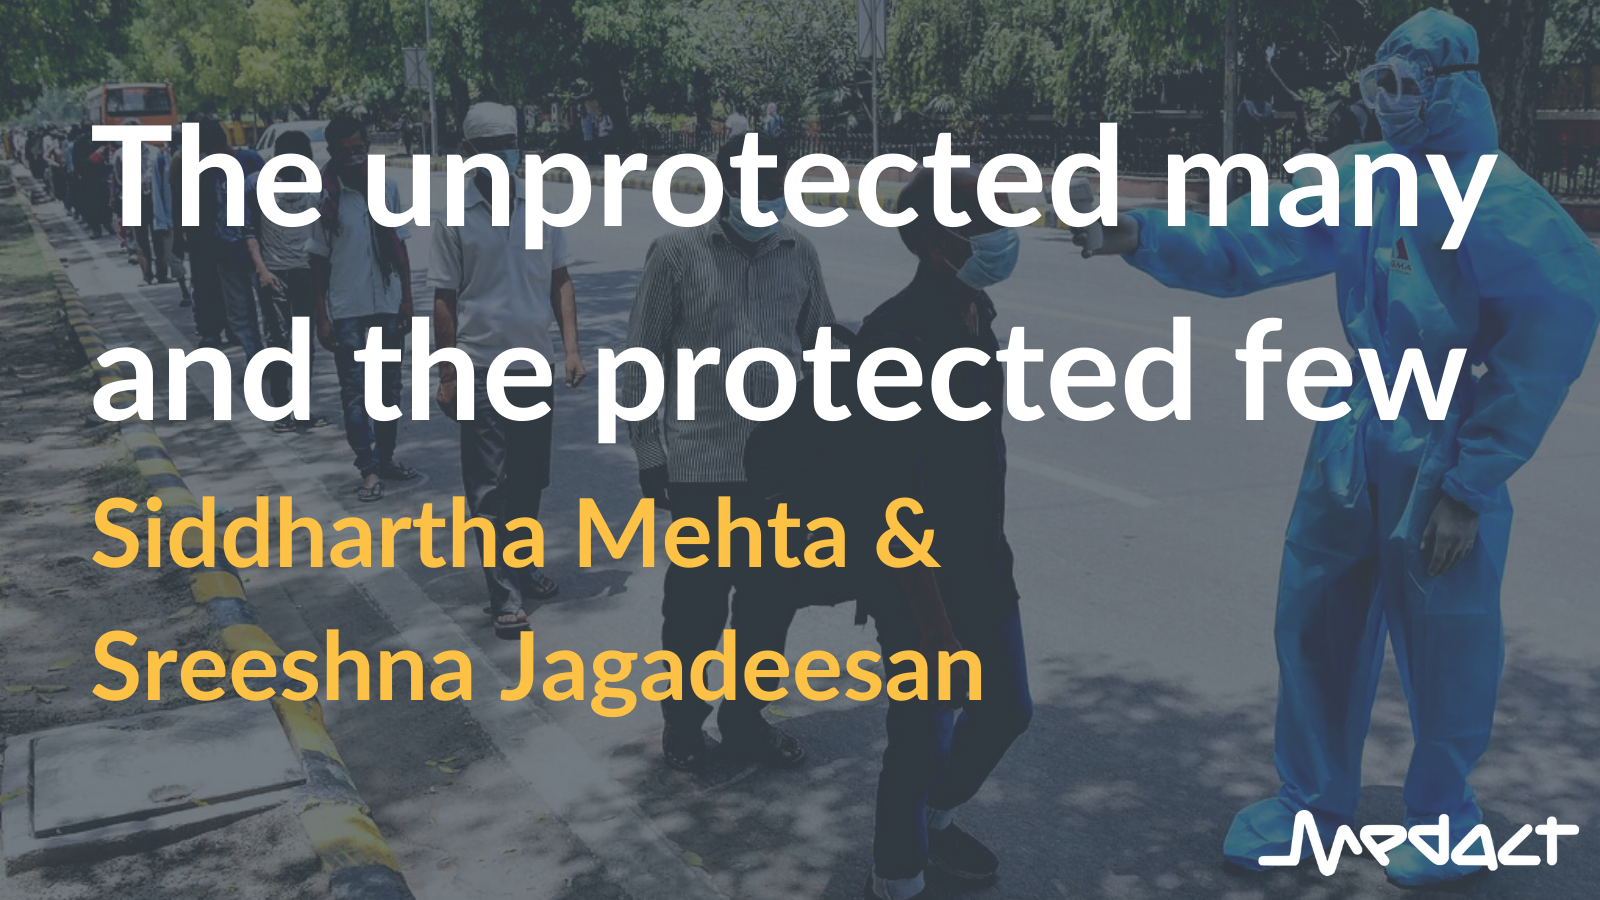 The unprotected many and the protected few: Working towards a health justice approach to future pandemic preparedness.